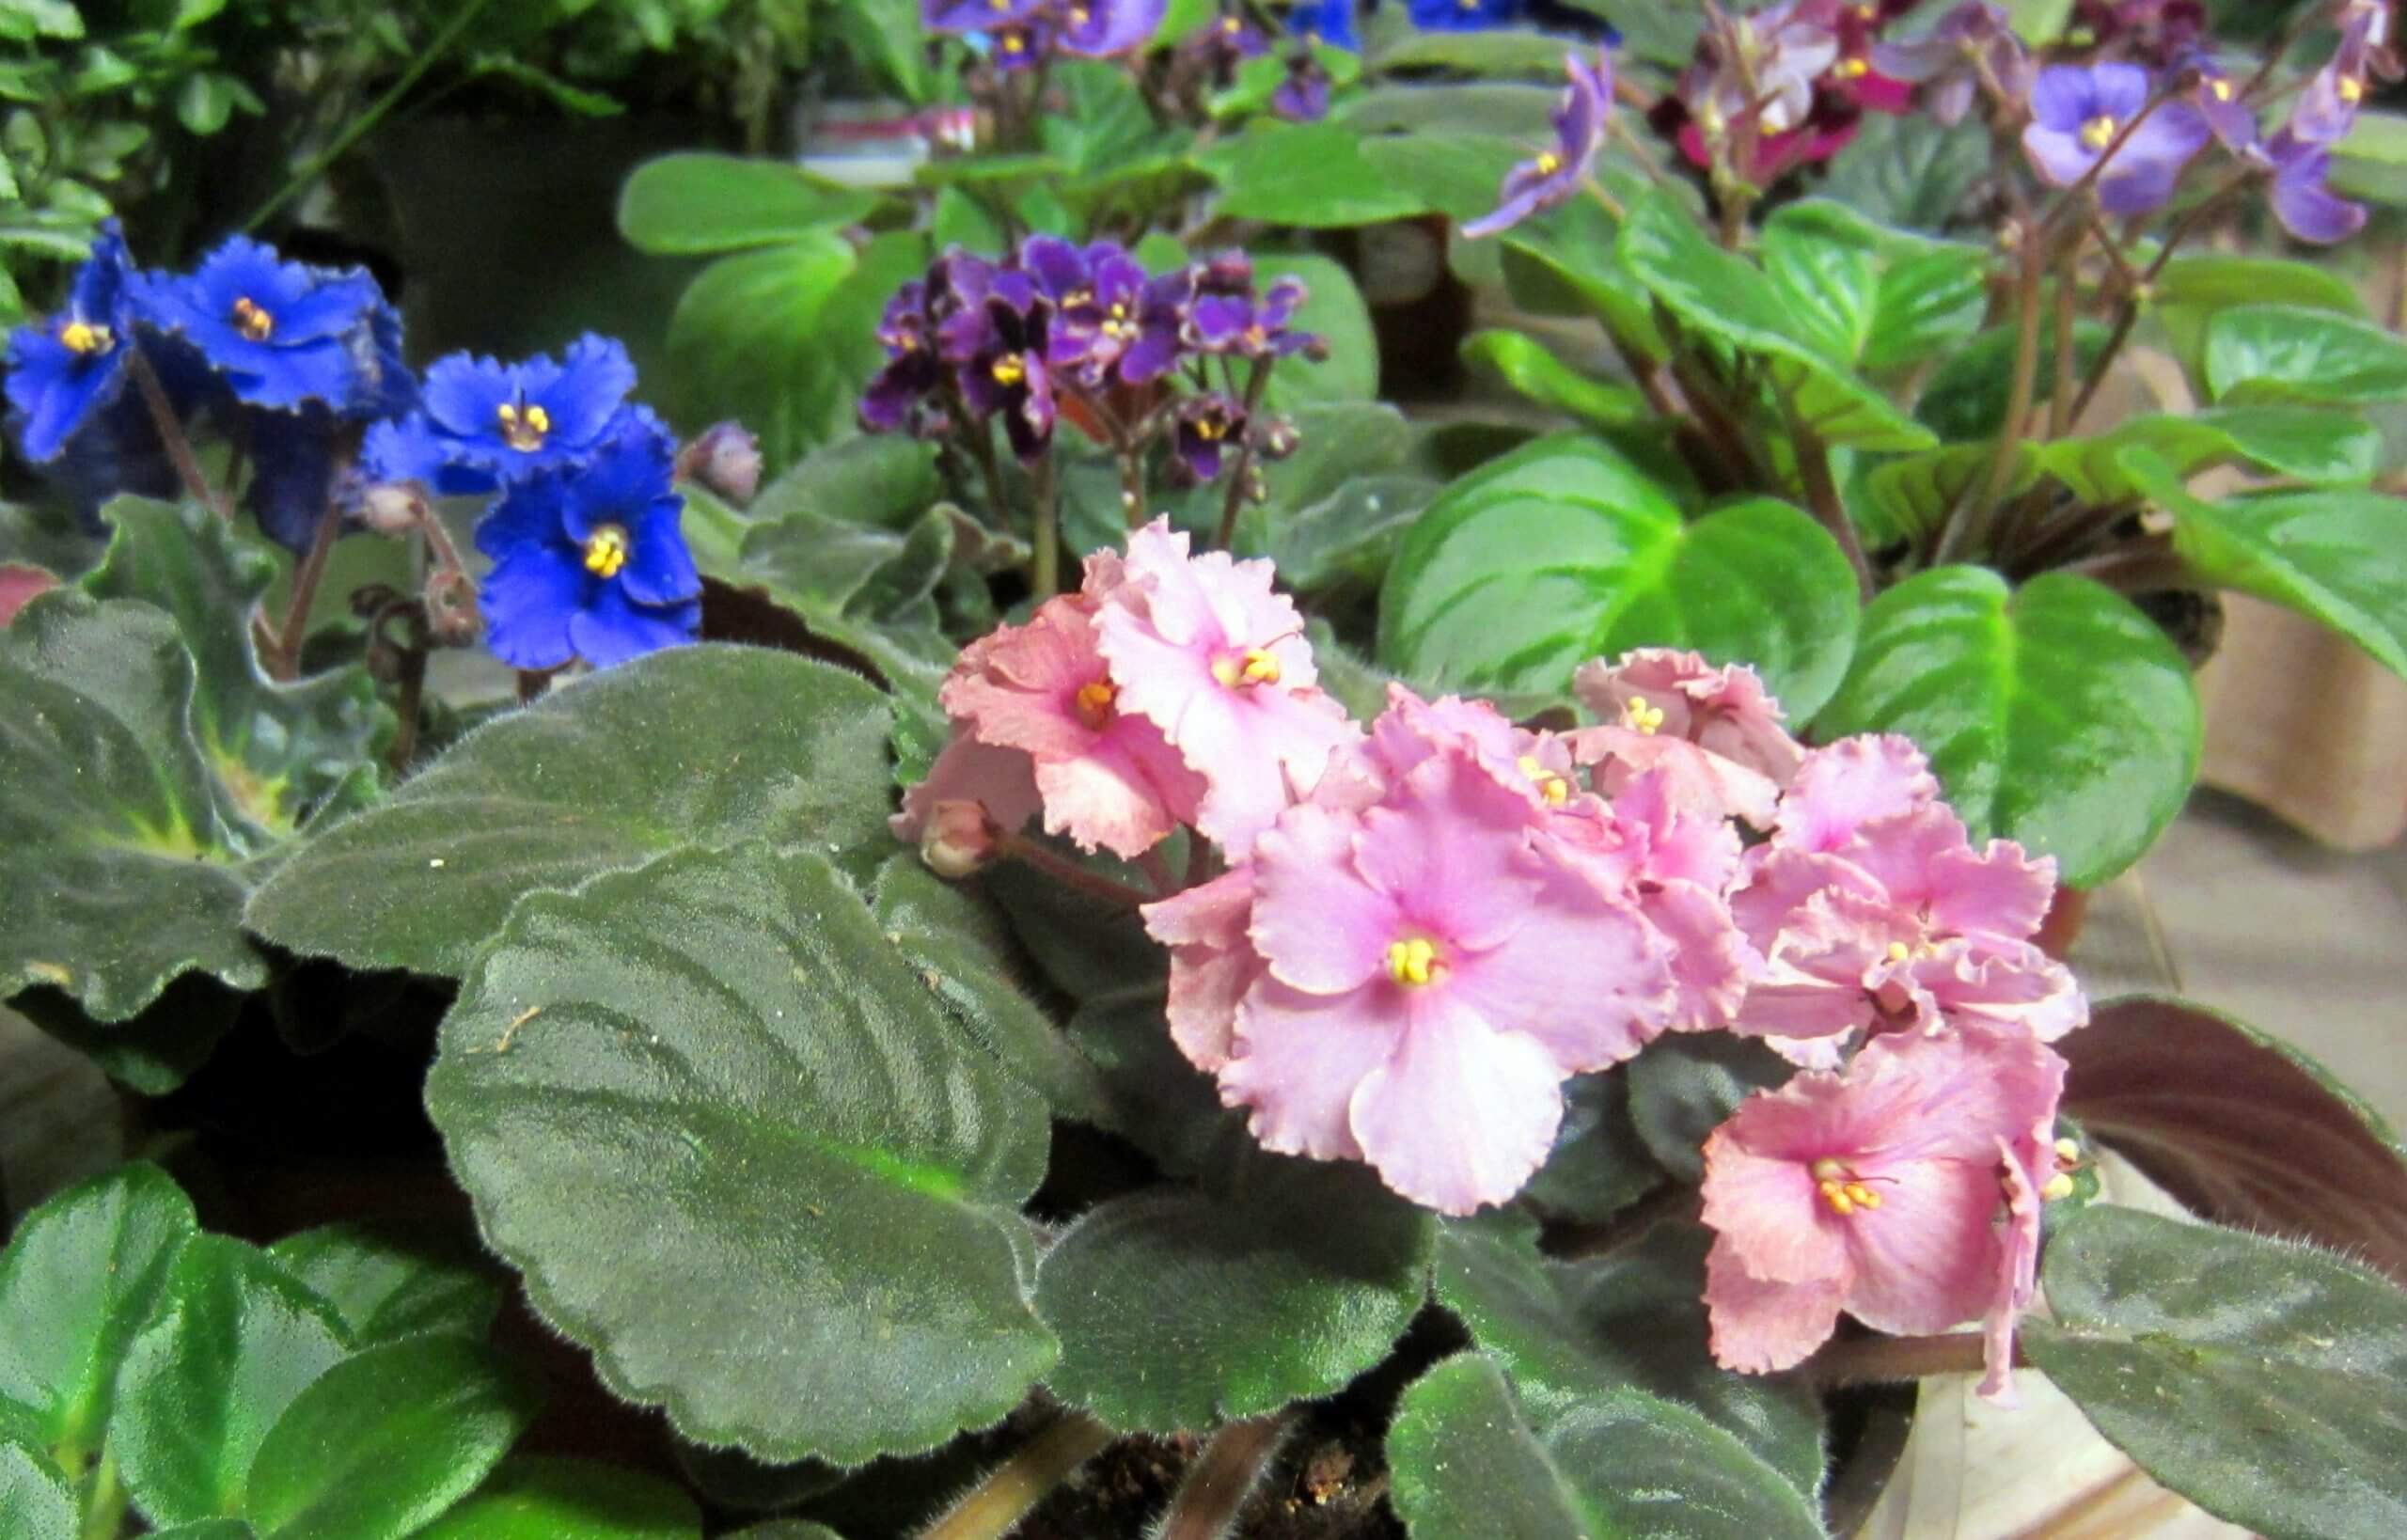 A myriad of colorful African violets await adoption at your local garden center.